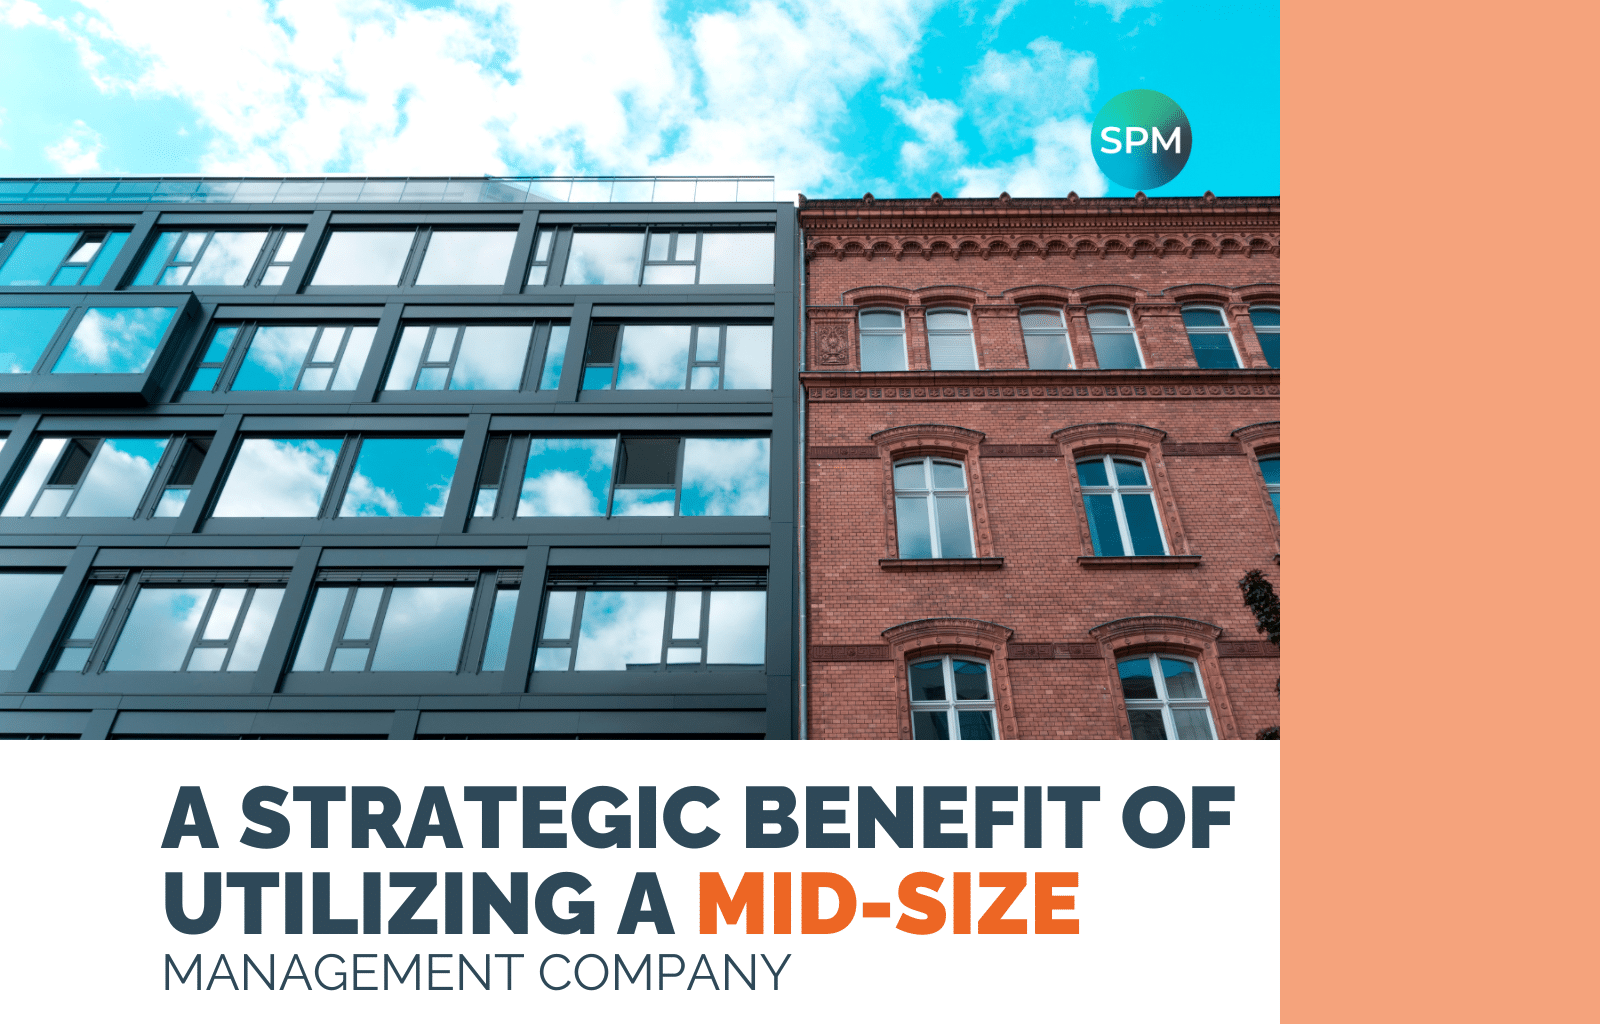 A Strategic Benefit of Utilizing a Mid-Size Management Company